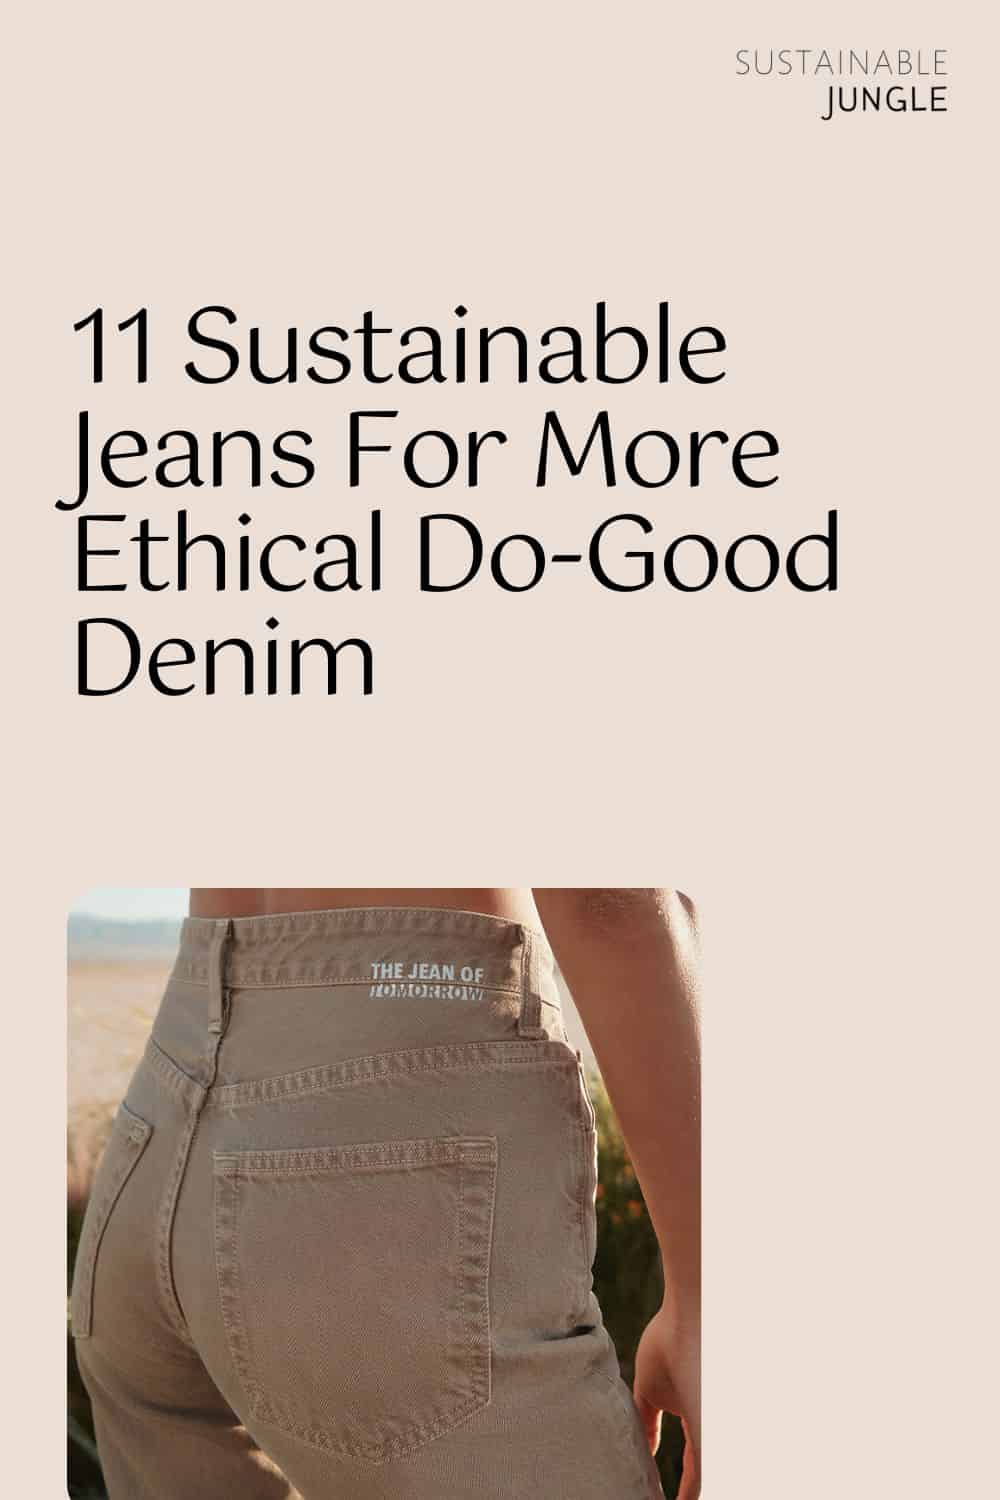 11 Sustainable Jeans For More Ethical Do-Good Denim Image by AG Jeans #sustainablejeans #sustainablejeansbrands #sustainabledenim #sustainabledenimbrands #sustainablemensjeans #isdenimsustainable #sustainablejungle